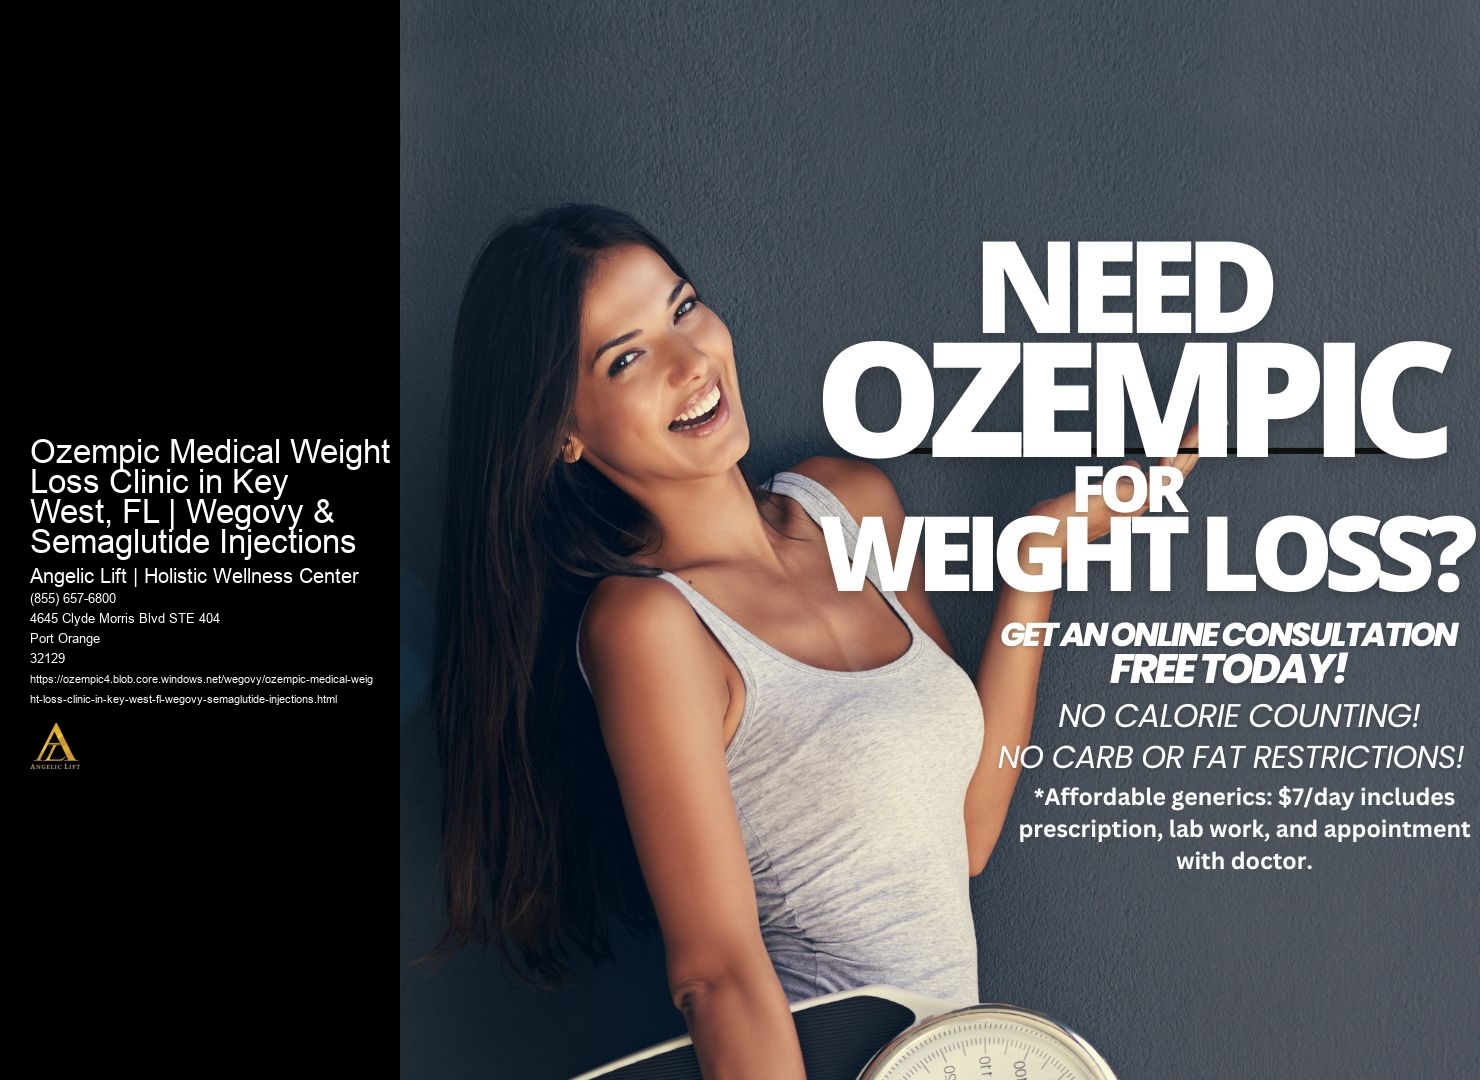 Ozempic Medical Weight Loss Clinic in Key West, FL | Wegovy & Semaglutide Injections